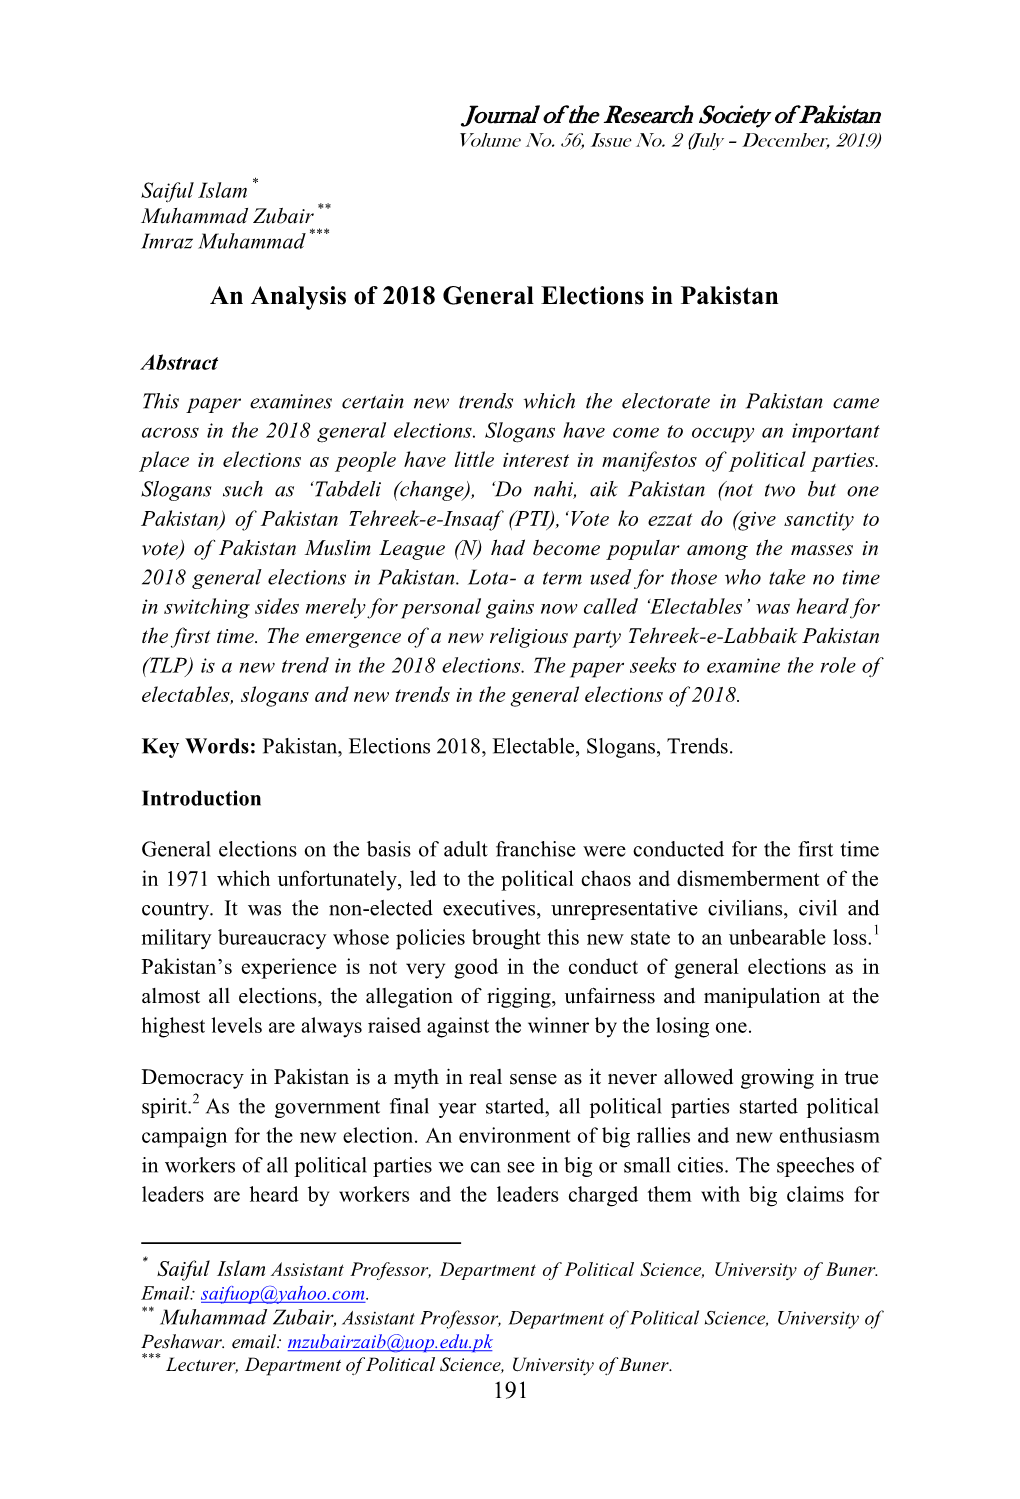 An Analysis of 2018 General Elections in Pakistan